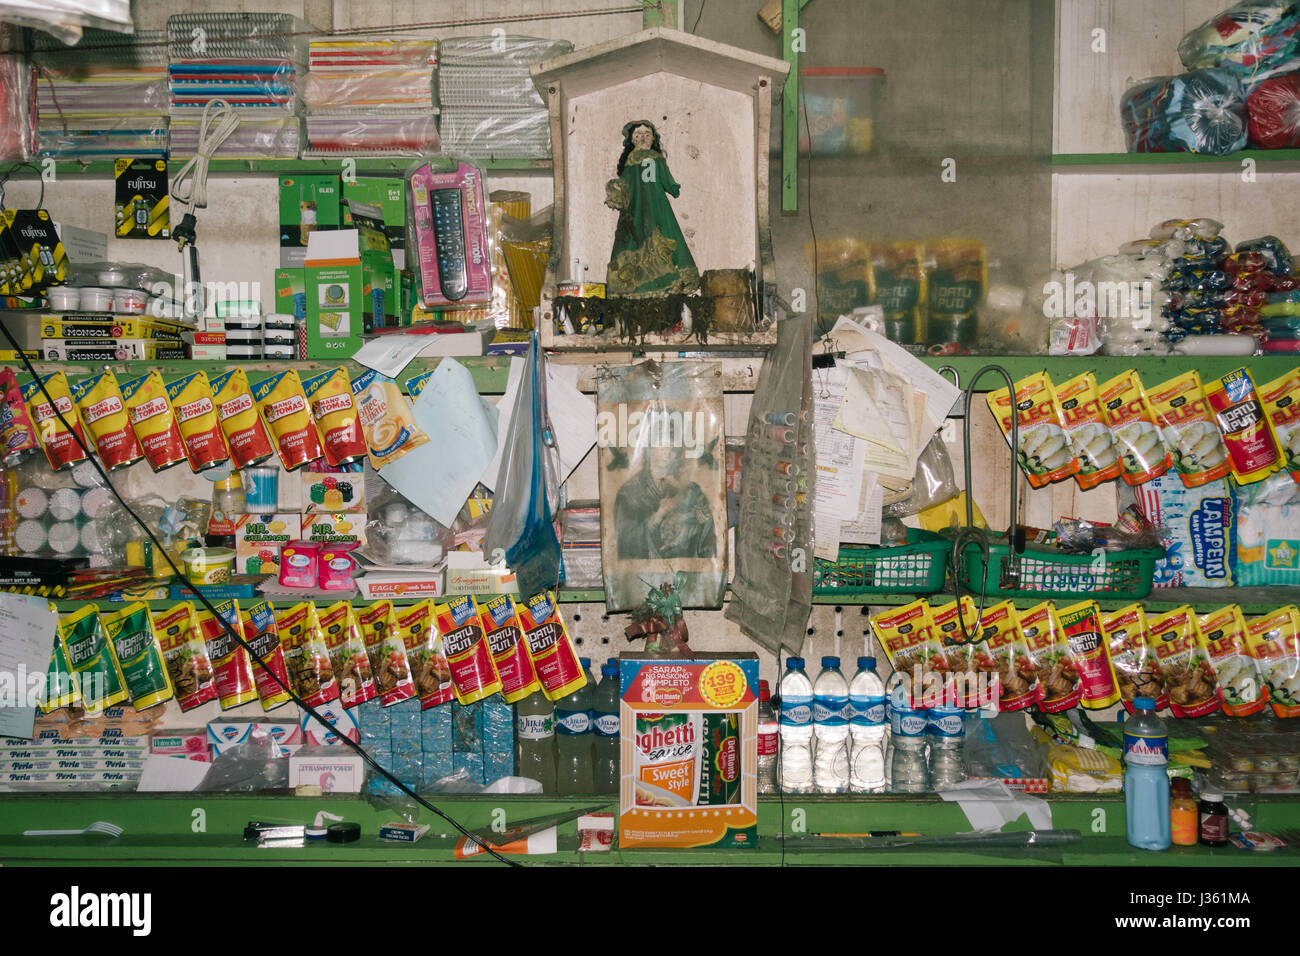 Polillo Island, Philippines - April 30, 2017: Goods for sale and religious images displayed at a local sari-sari store on the Polillo Island in the Ph Stock Photo